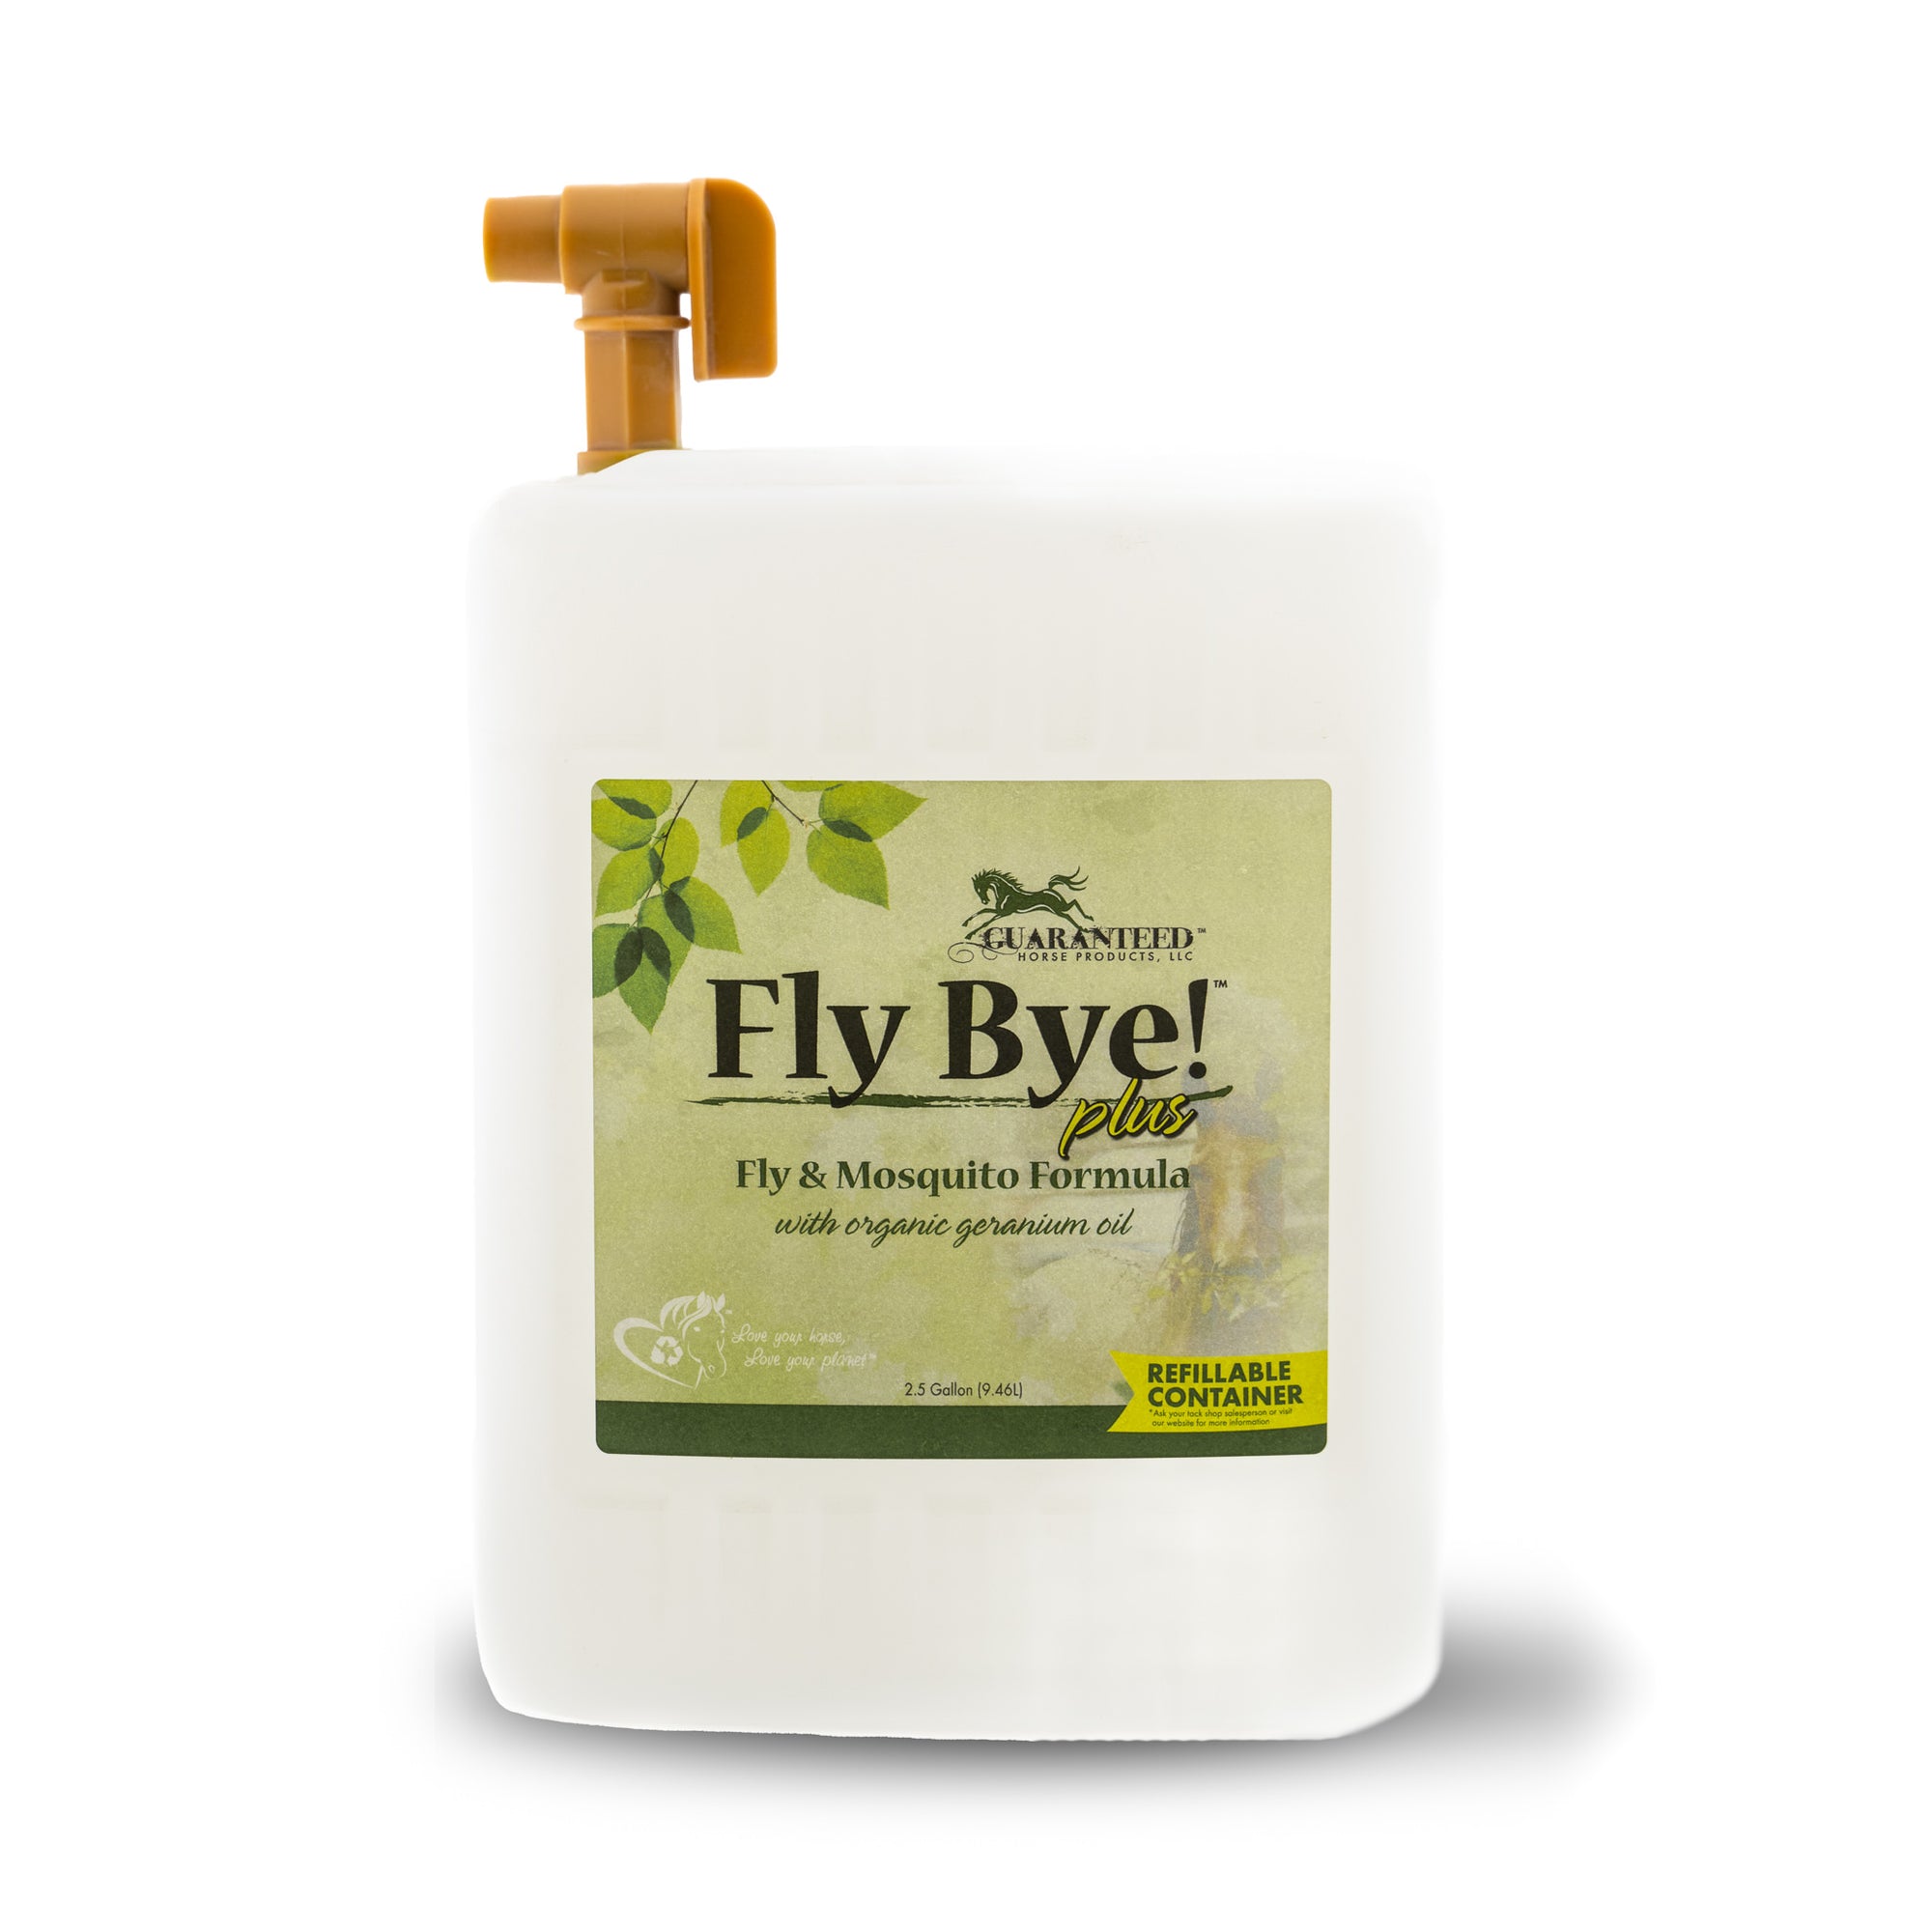 Fly Bye! Plus fly spray 2.5 stationary refill container